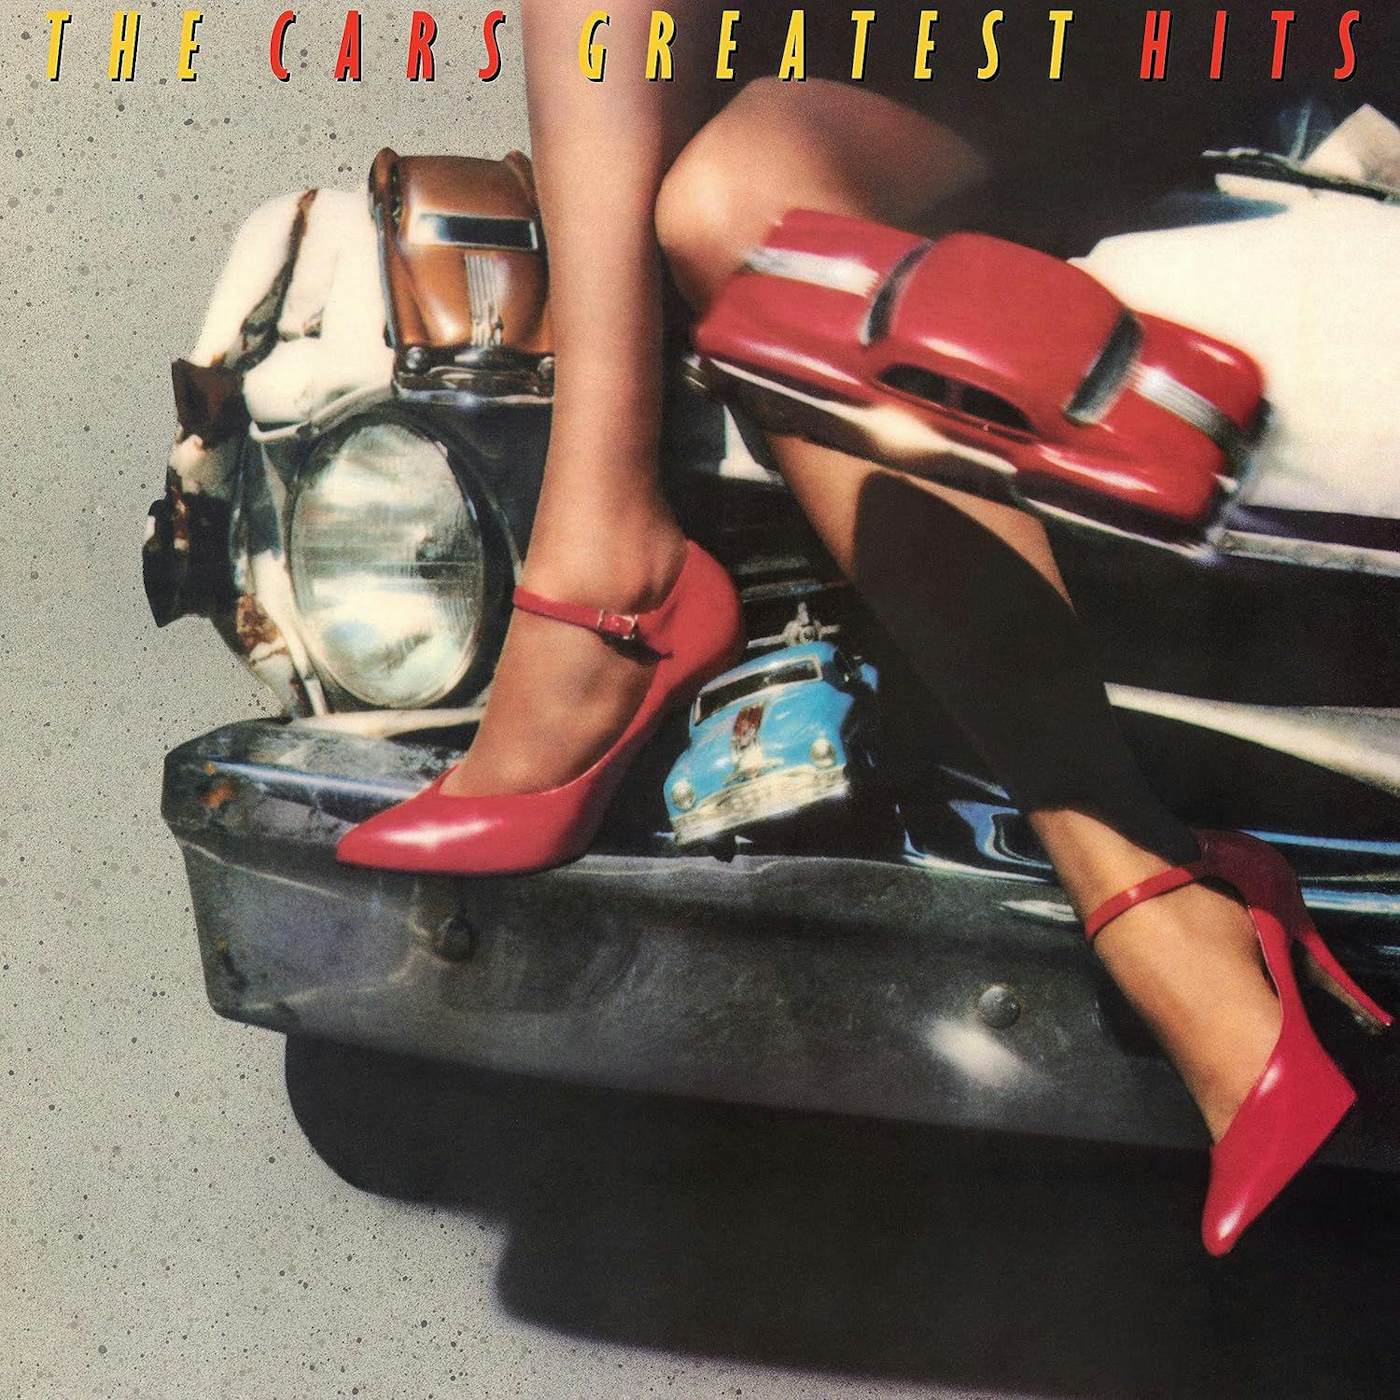 The Cars Greatest Hits Vinyl Record